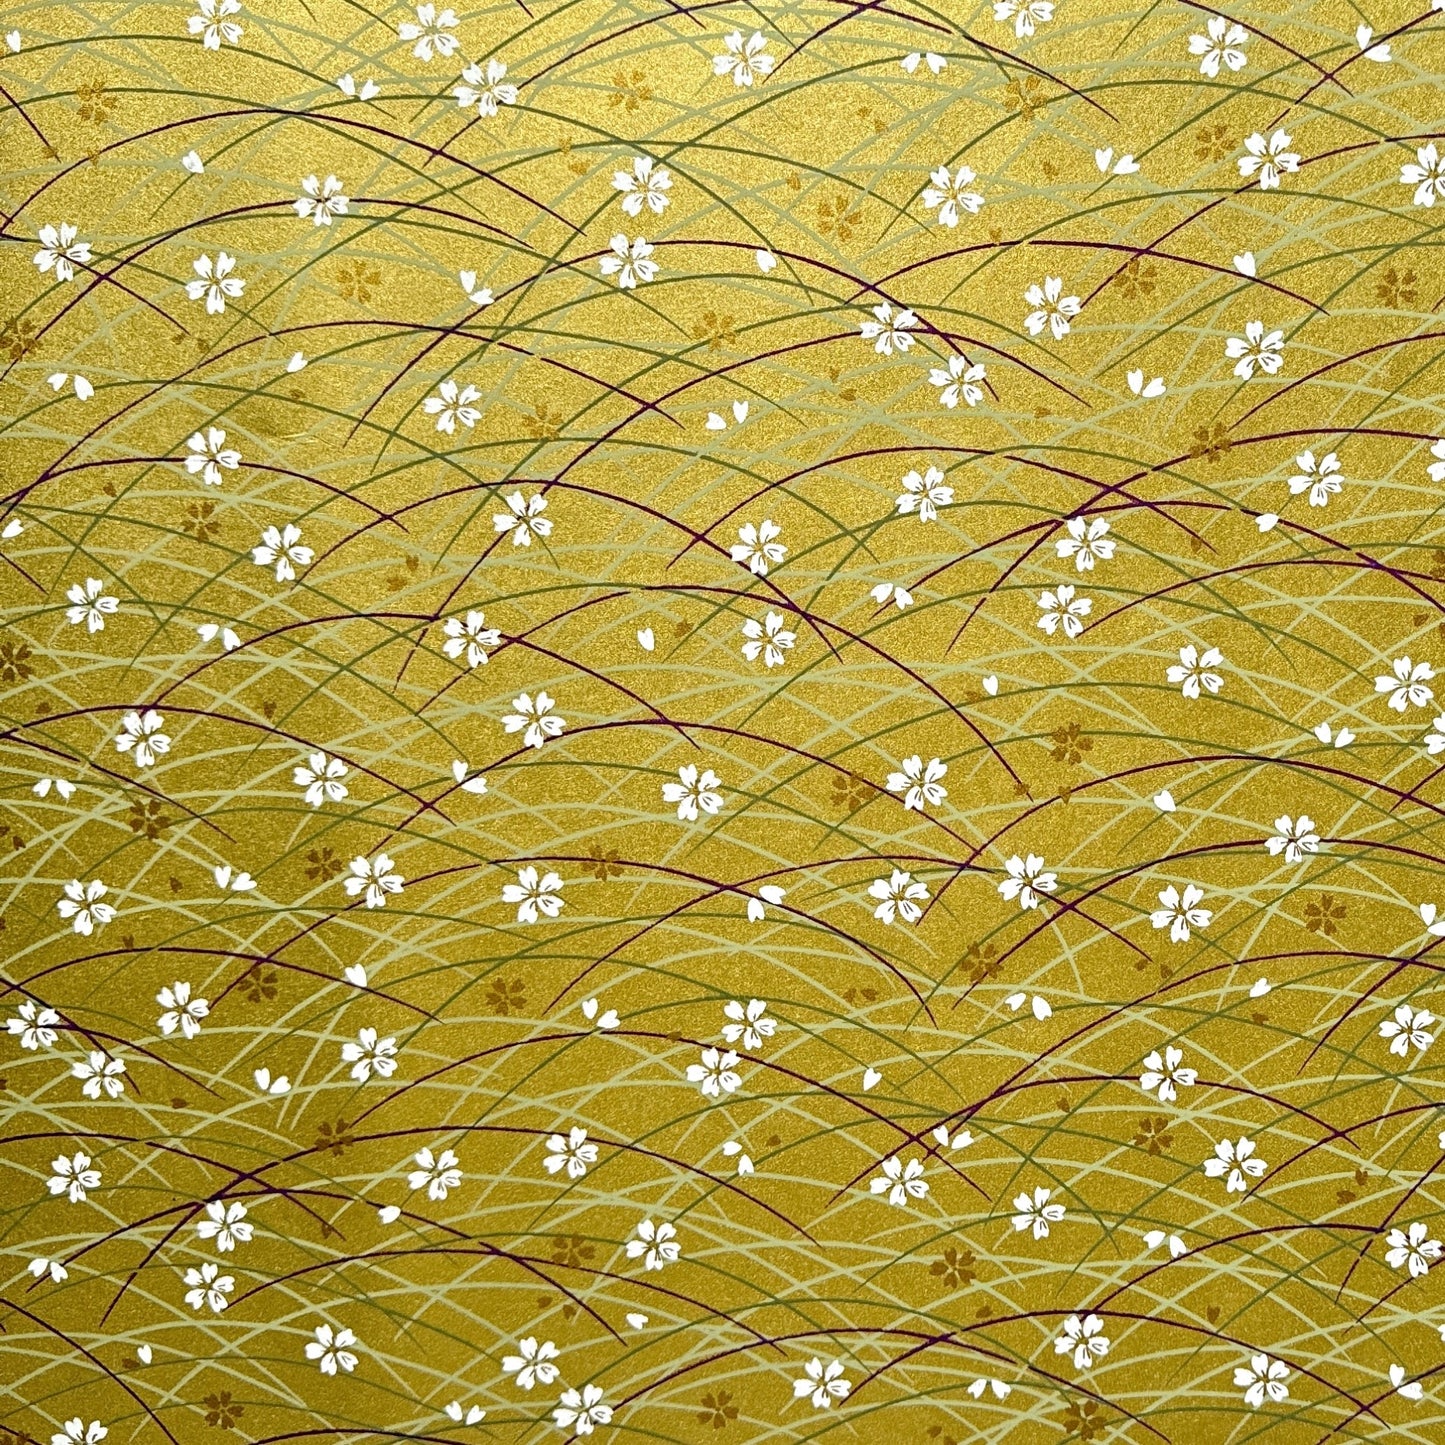 Japanese silkscreen chiyogami paper with a pattern of purple arches and white cherry blossom on antique gold backdrop